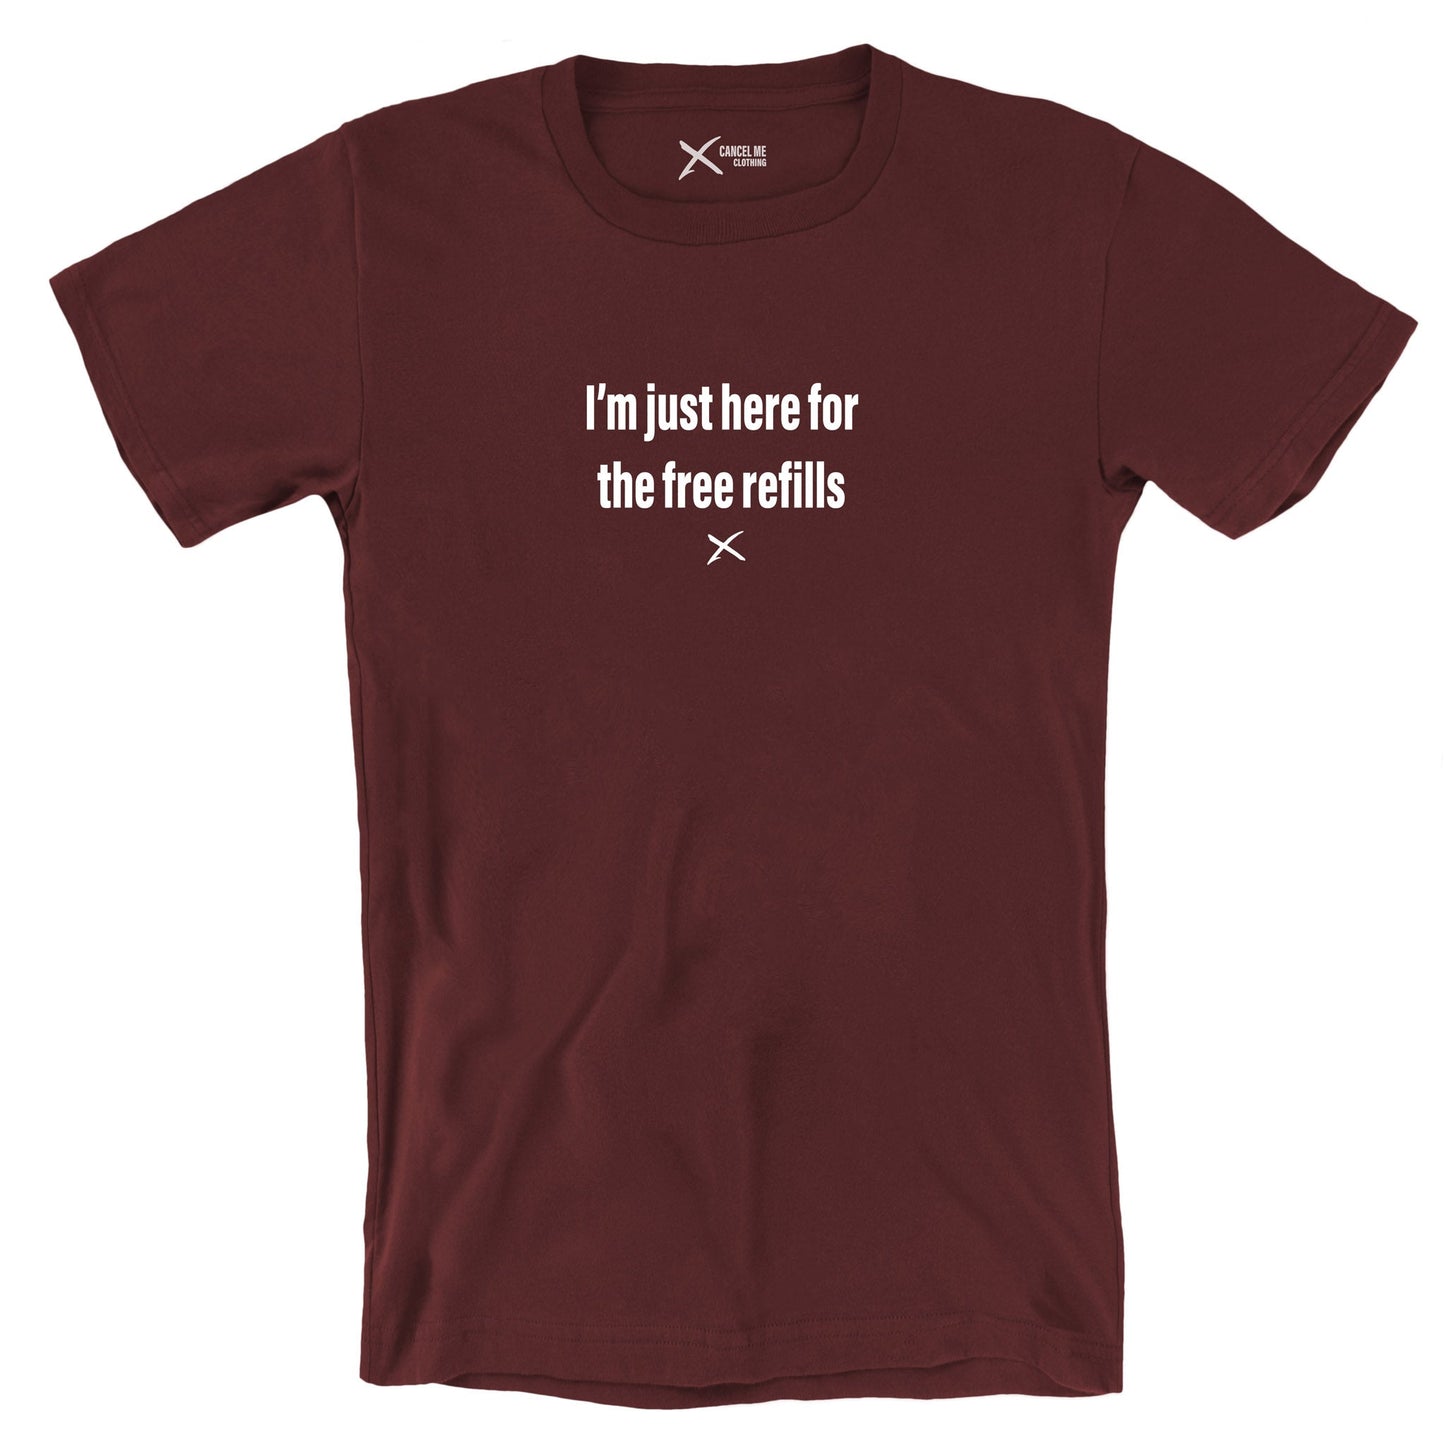 I'm just here for the free refills - Shirt